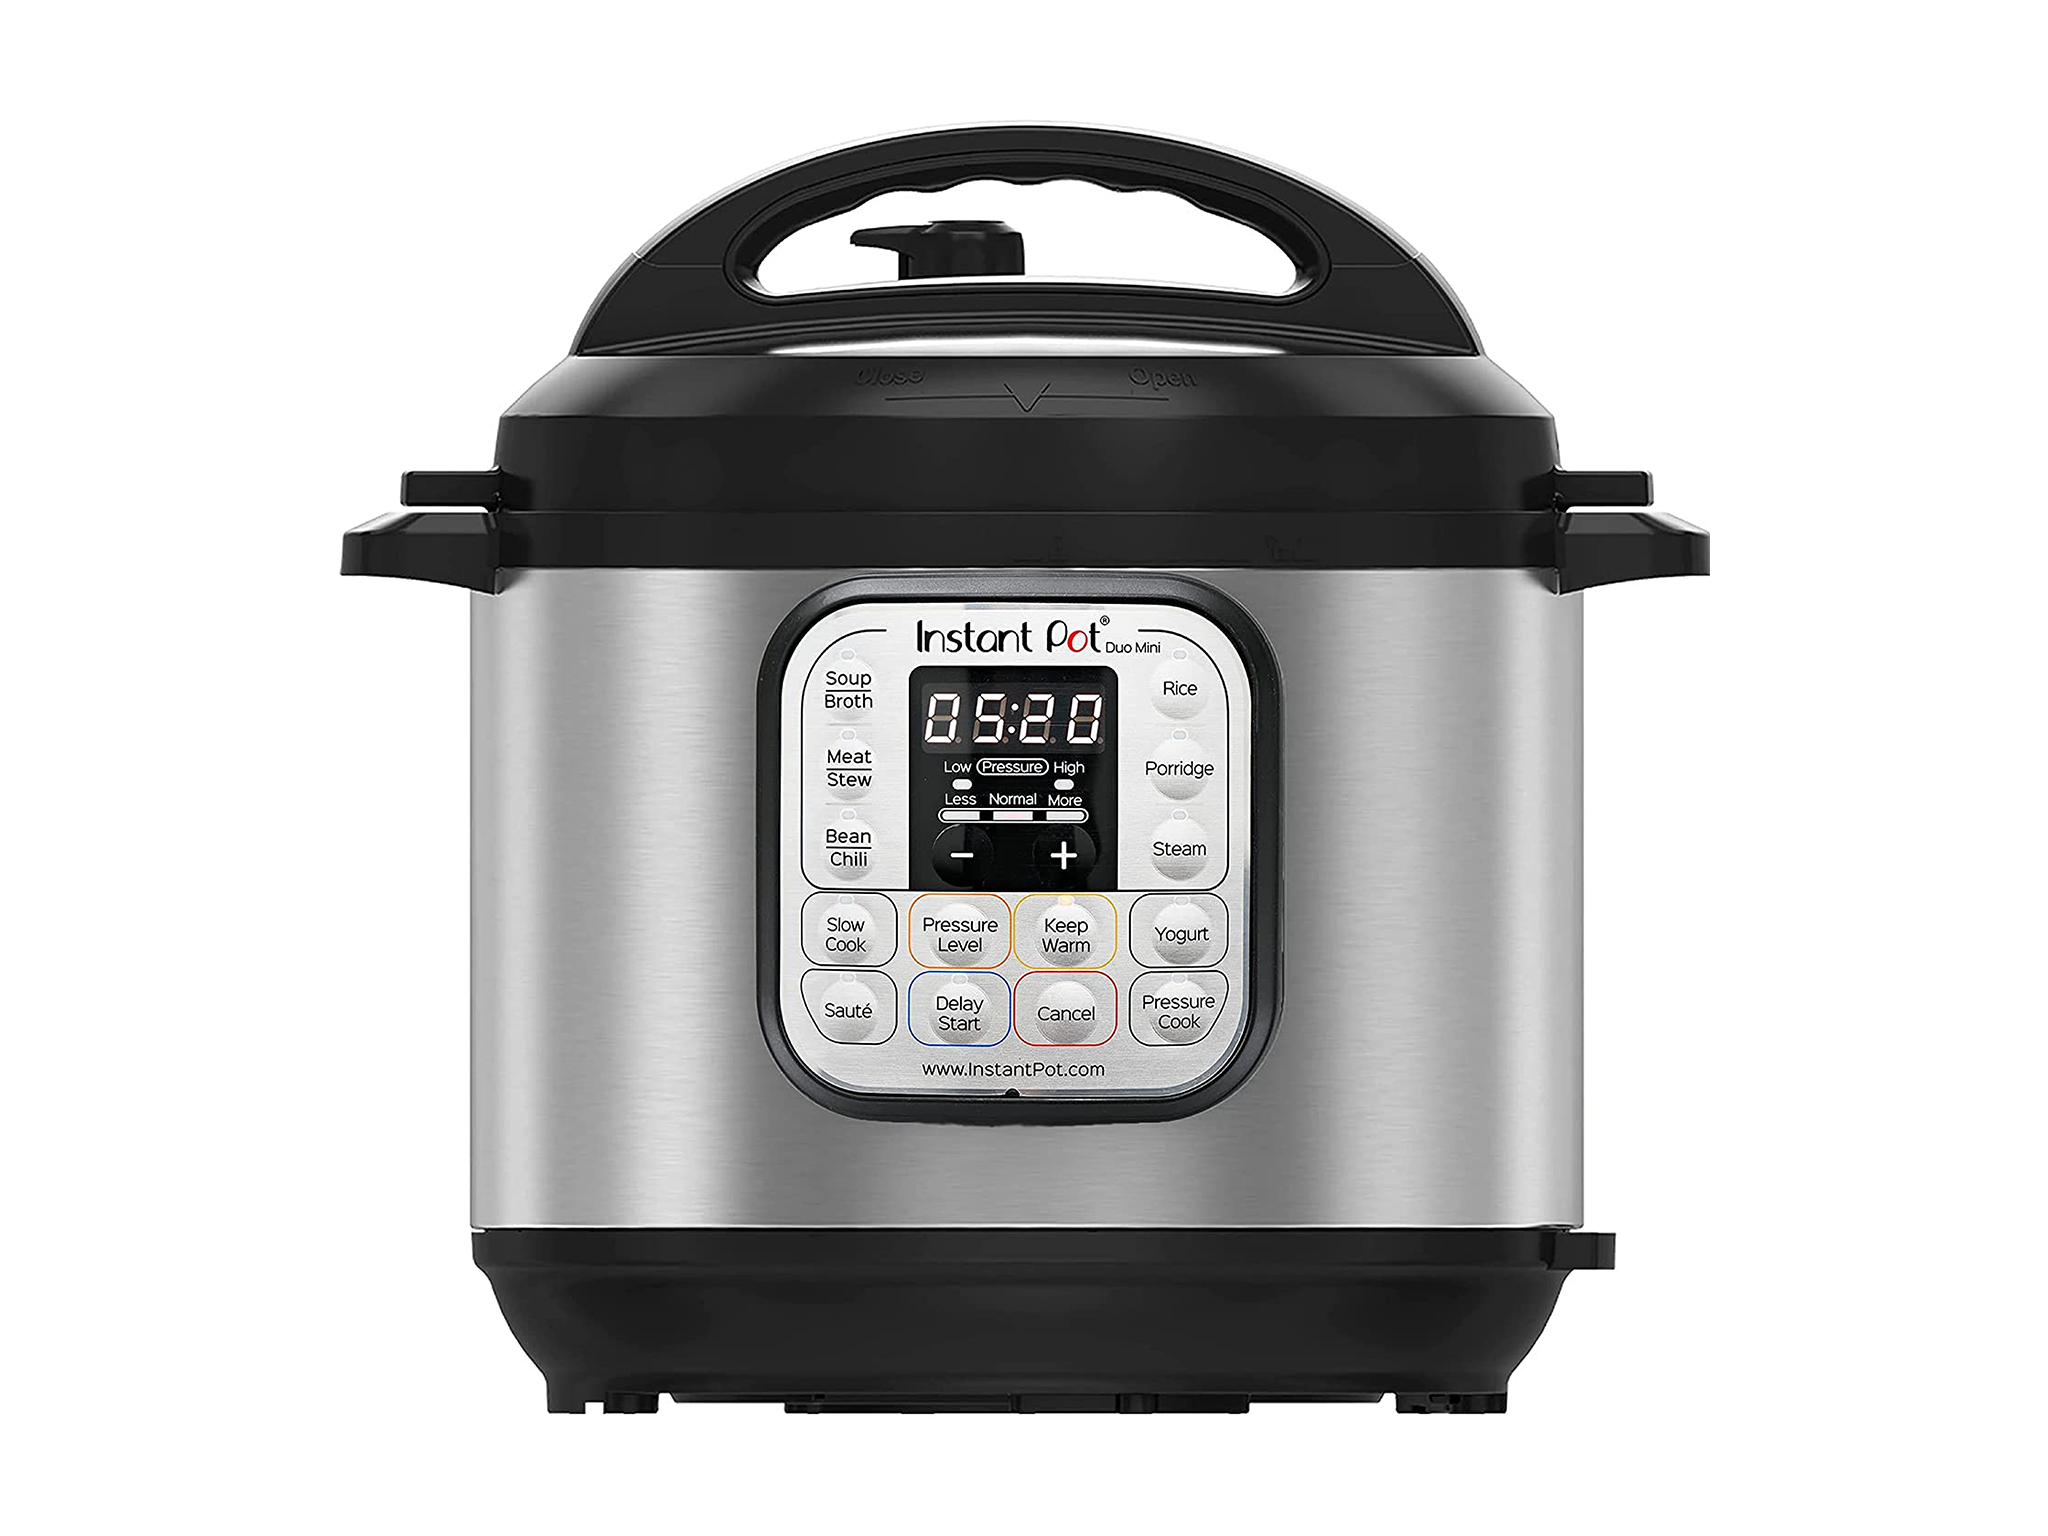 Instant Pot duo 7-in-1 cooker.png